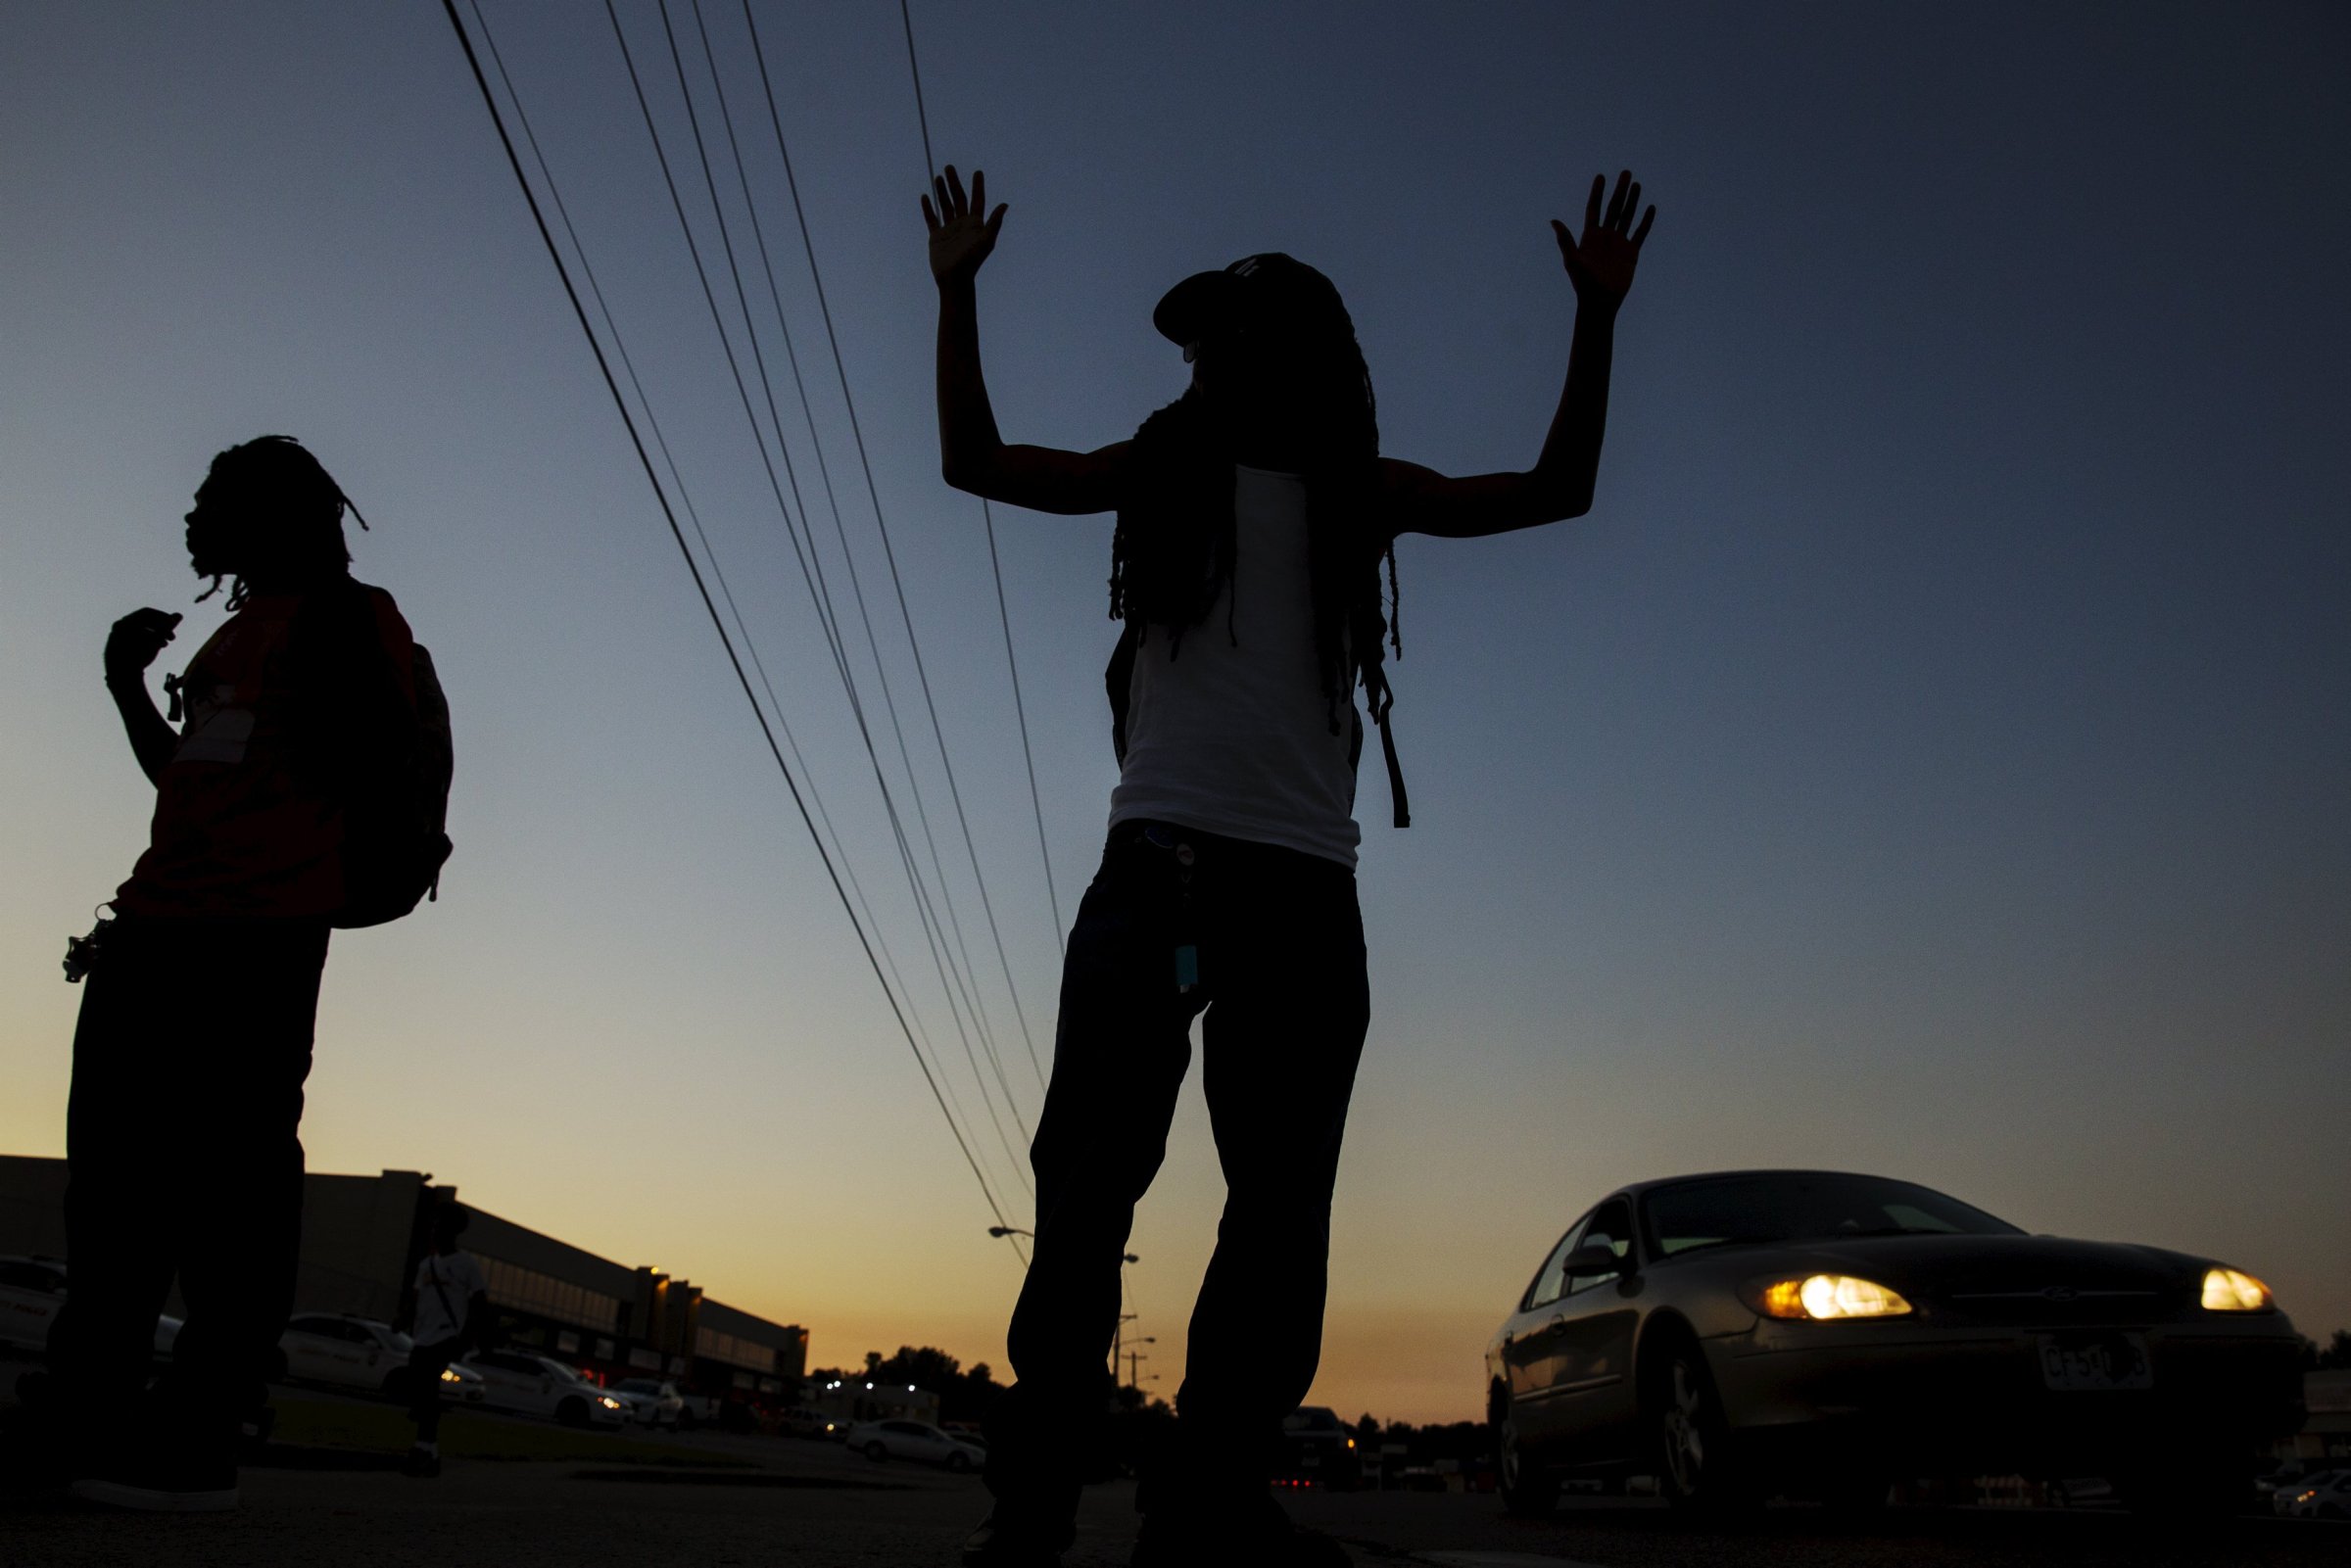 A man gestures on the side of West Florissant Ave. as a much smaller group of demonstrators prepare to protest for another night in Ferguson, Missouri